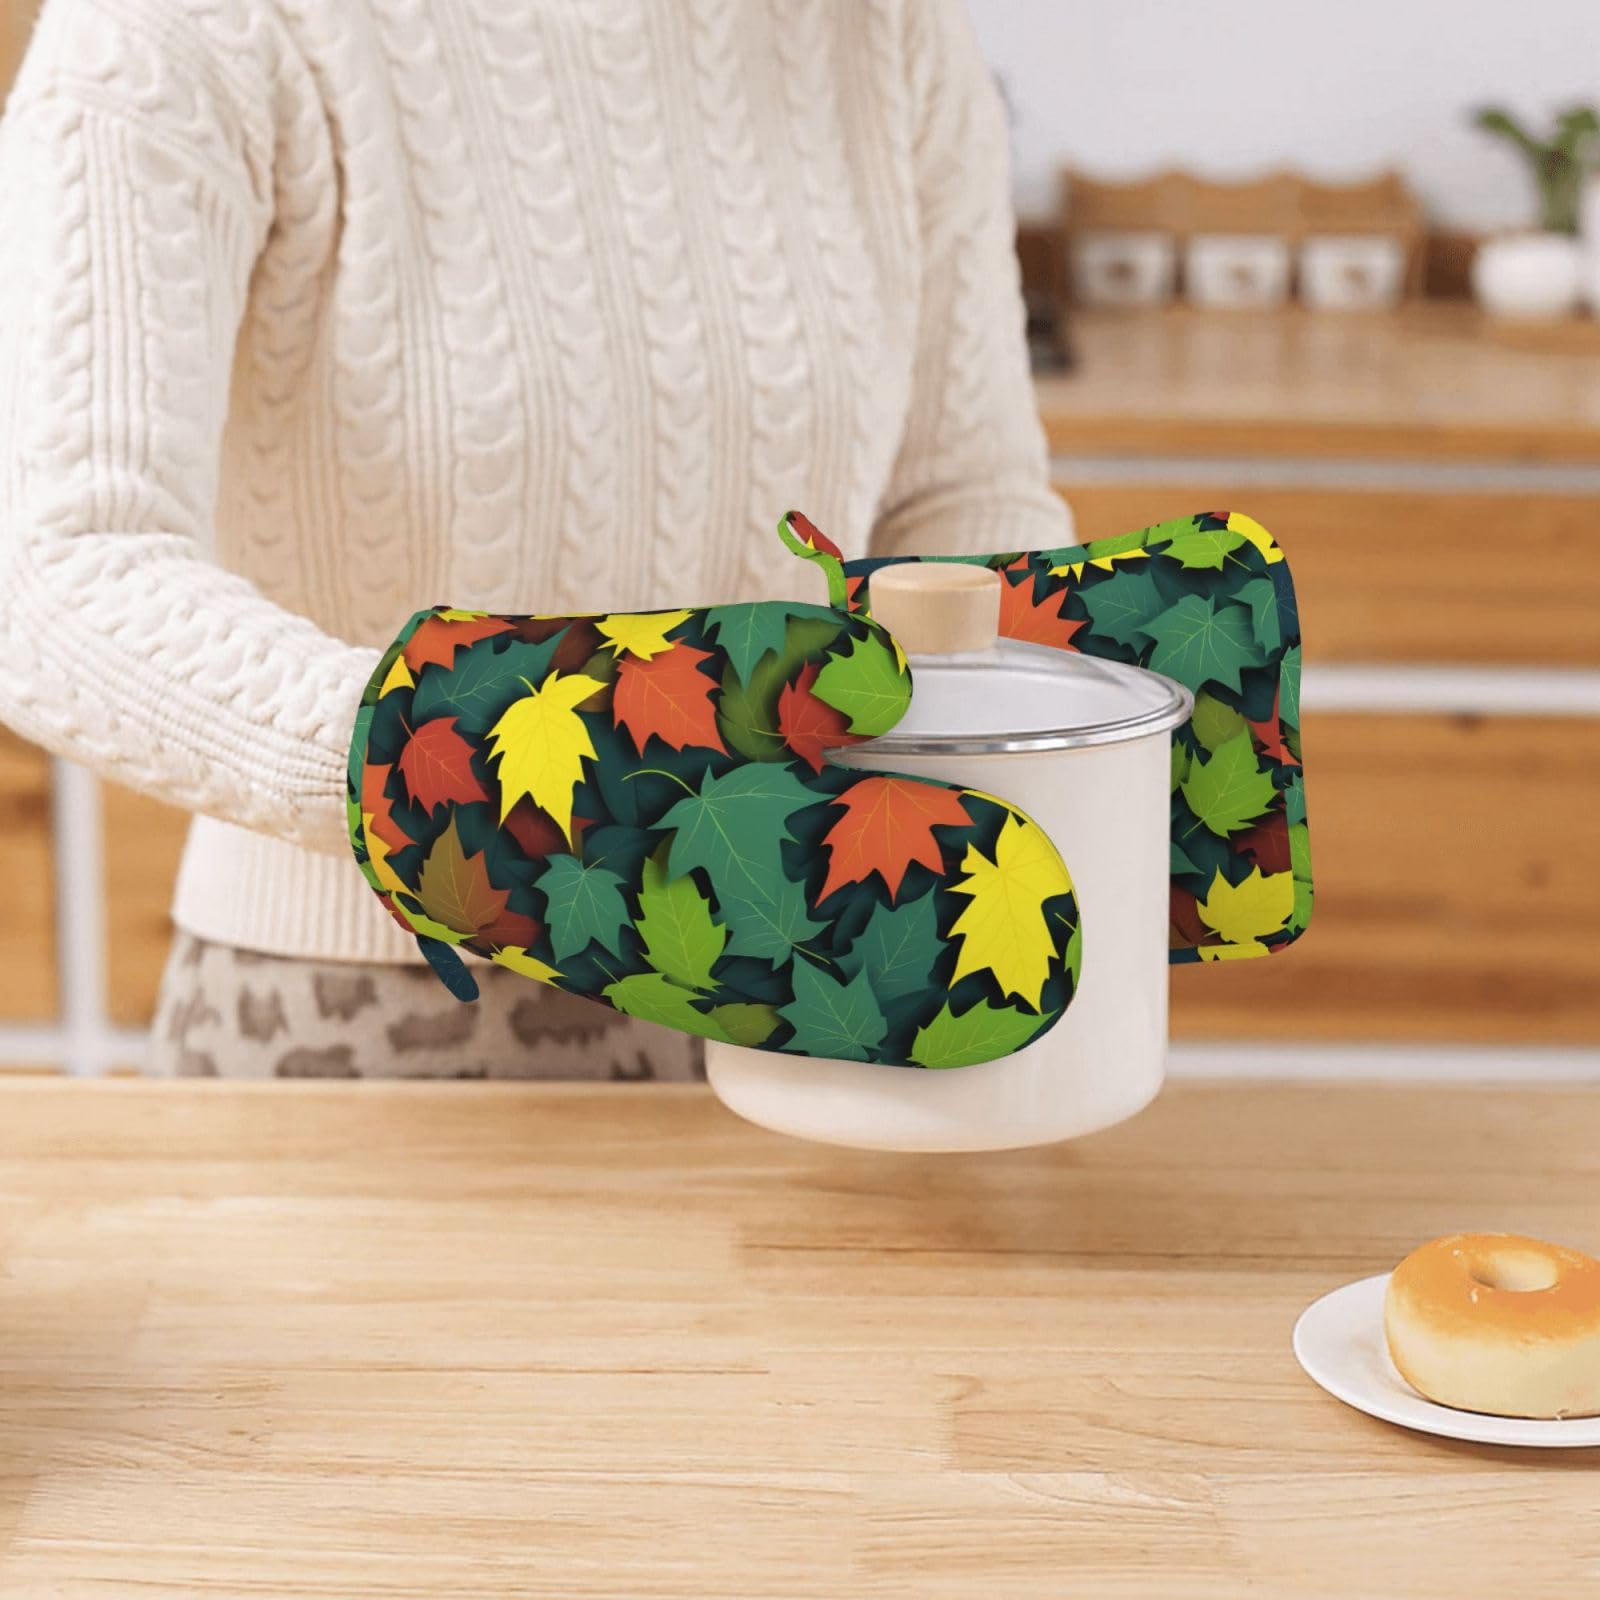 Colorful Leaf Silicone Oven Mitts Pot Holder Sets 2pcs Cute Design Washable Non Slip Kitchen Heat Resistant Mat Women's Cooking Gloves for Baking and BBQ Wear